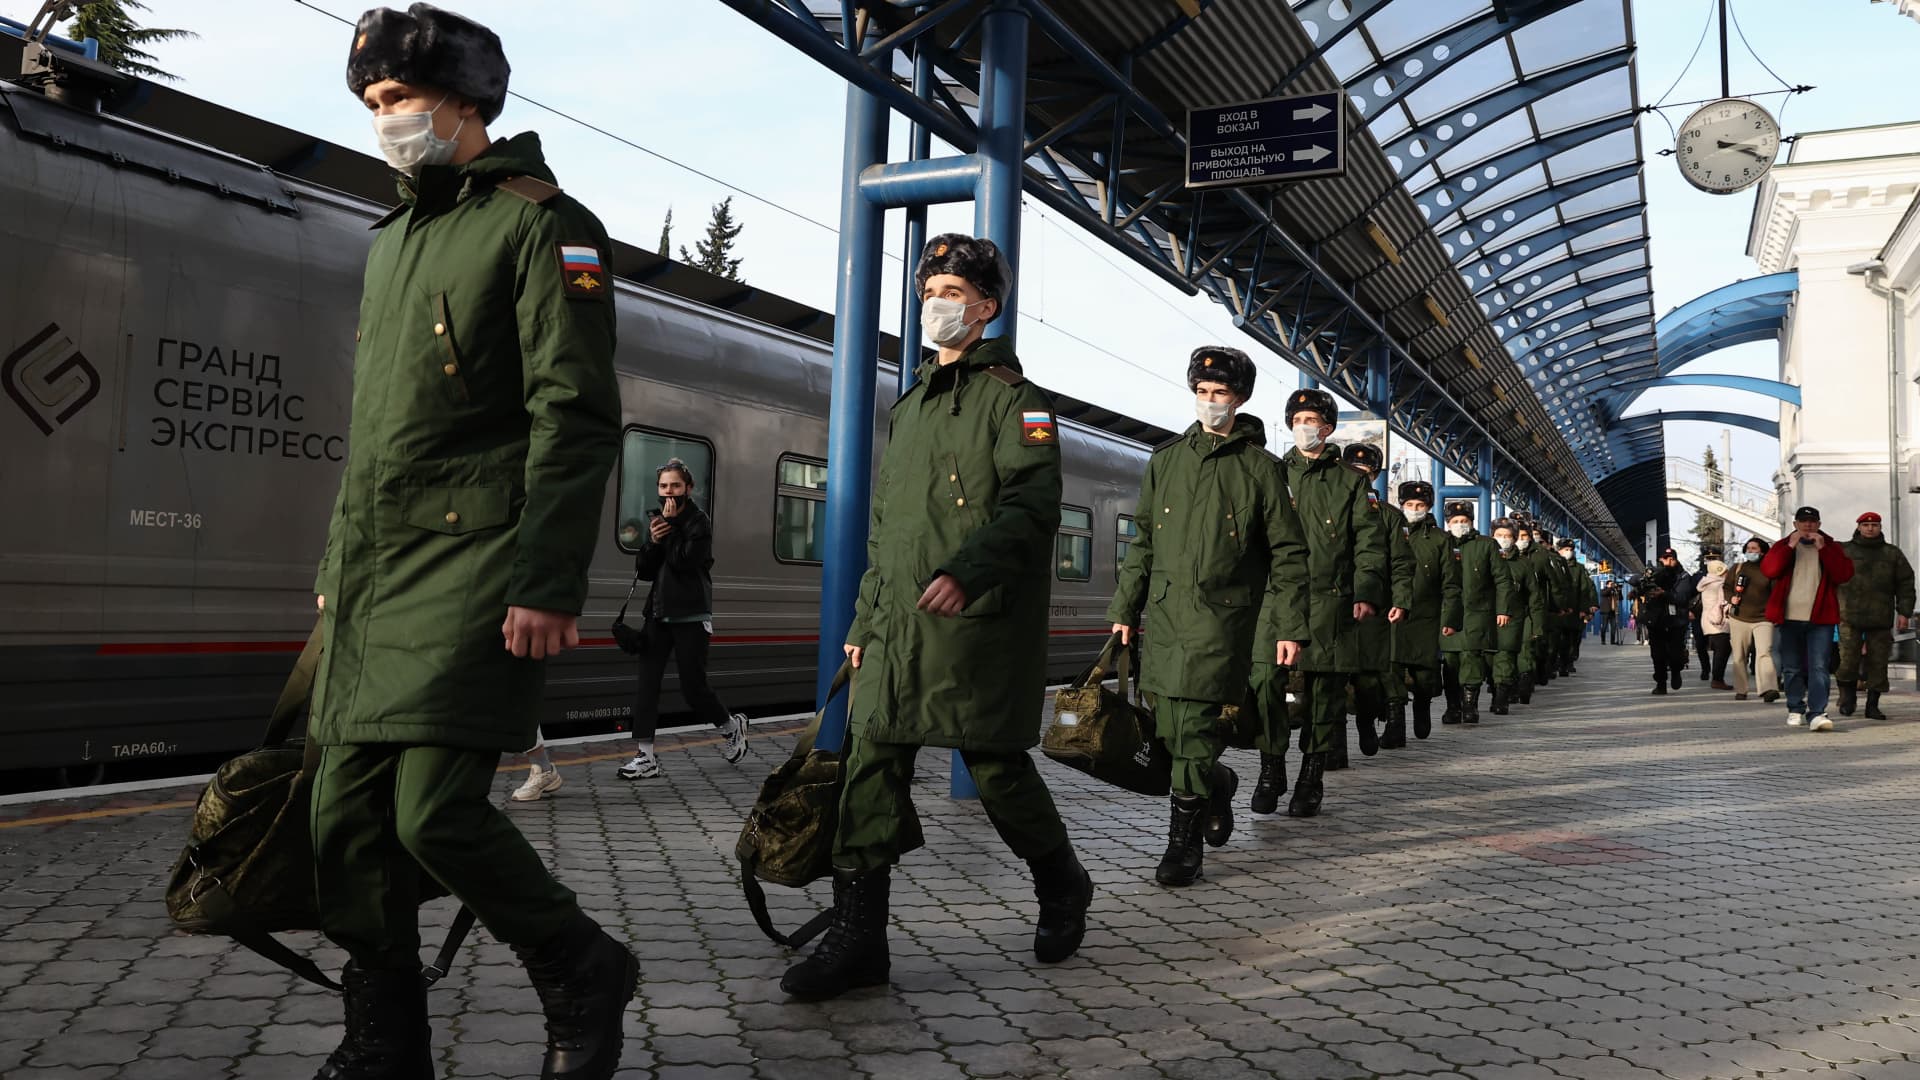 Conscripts line up at a railway station before departing for military service with the Russian Army. This year, the autumn military call-up in Russia lasts from October 1 to December 31; estimated 127,500 men are going to be drafted.